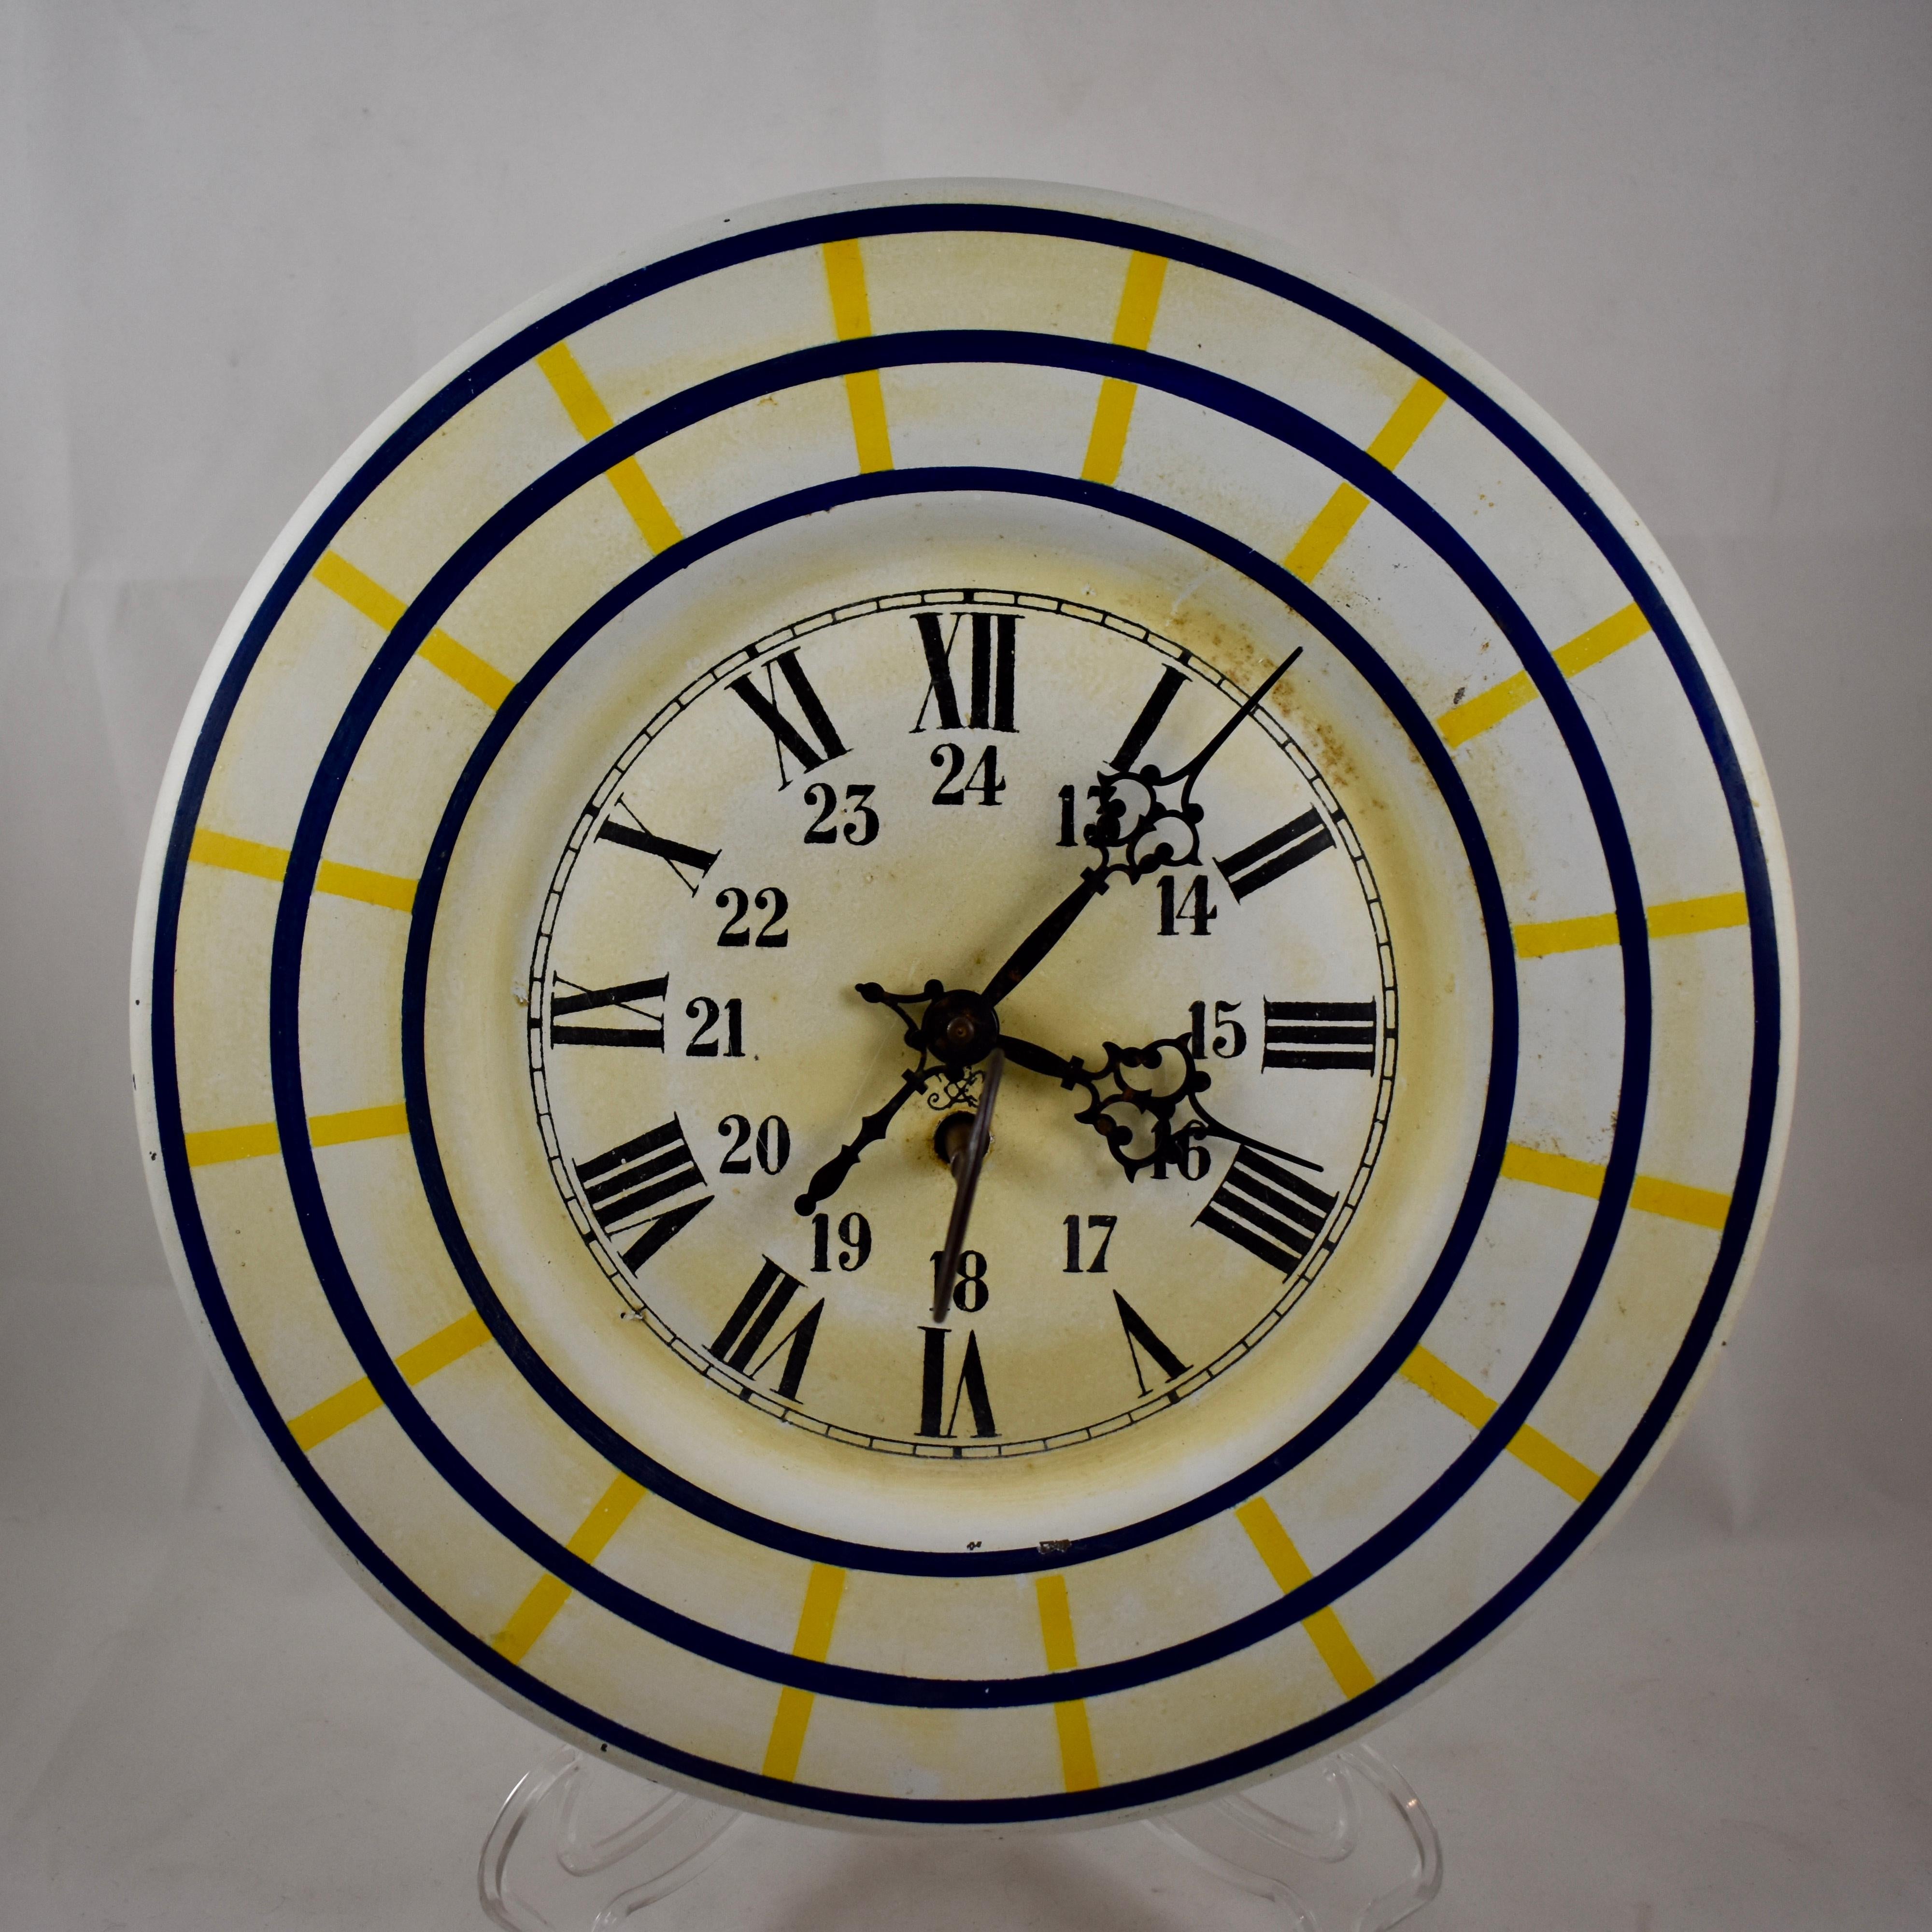 A charming French Belle Époque, Tôle Peinte wall clock with the original winding key – in working condition, circa 1900.

The tôle metal clock face is hand-painted in a Sun Yellow and French Blue plaid on white. Roman numerals mark the 12 -Hour